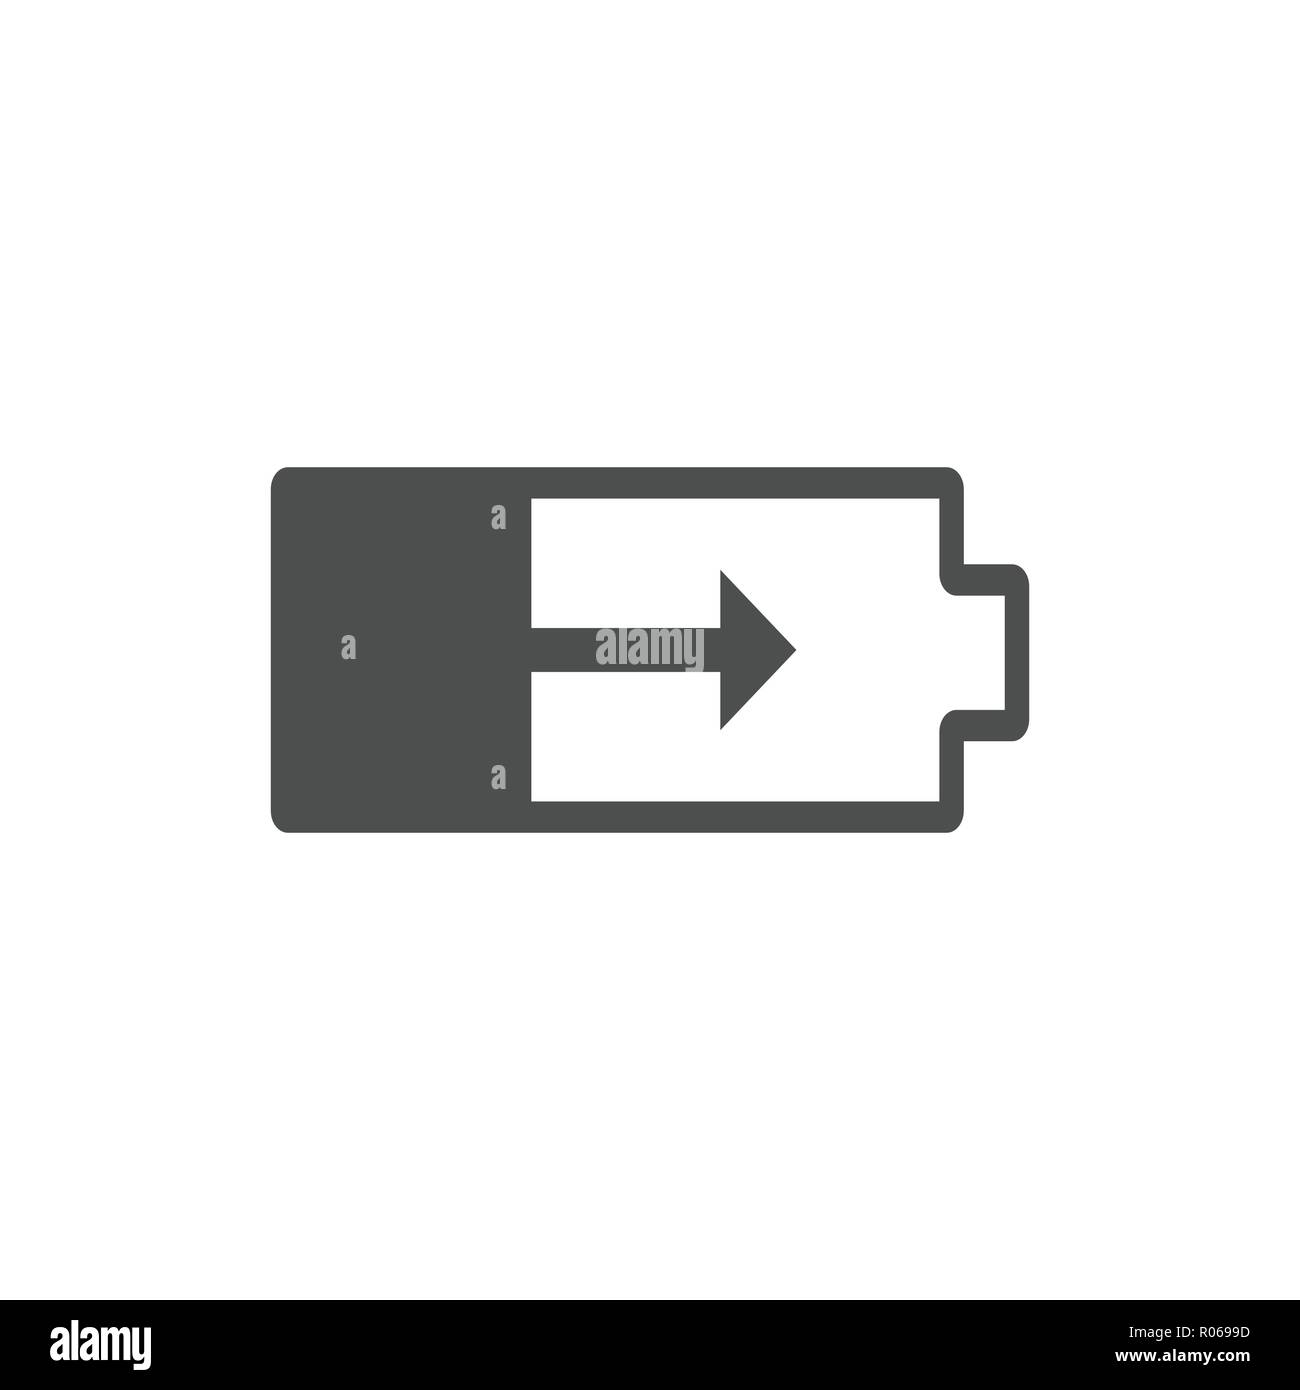 Battery load icon. Battery charge. Vector illustration, flat design. Stock Vector